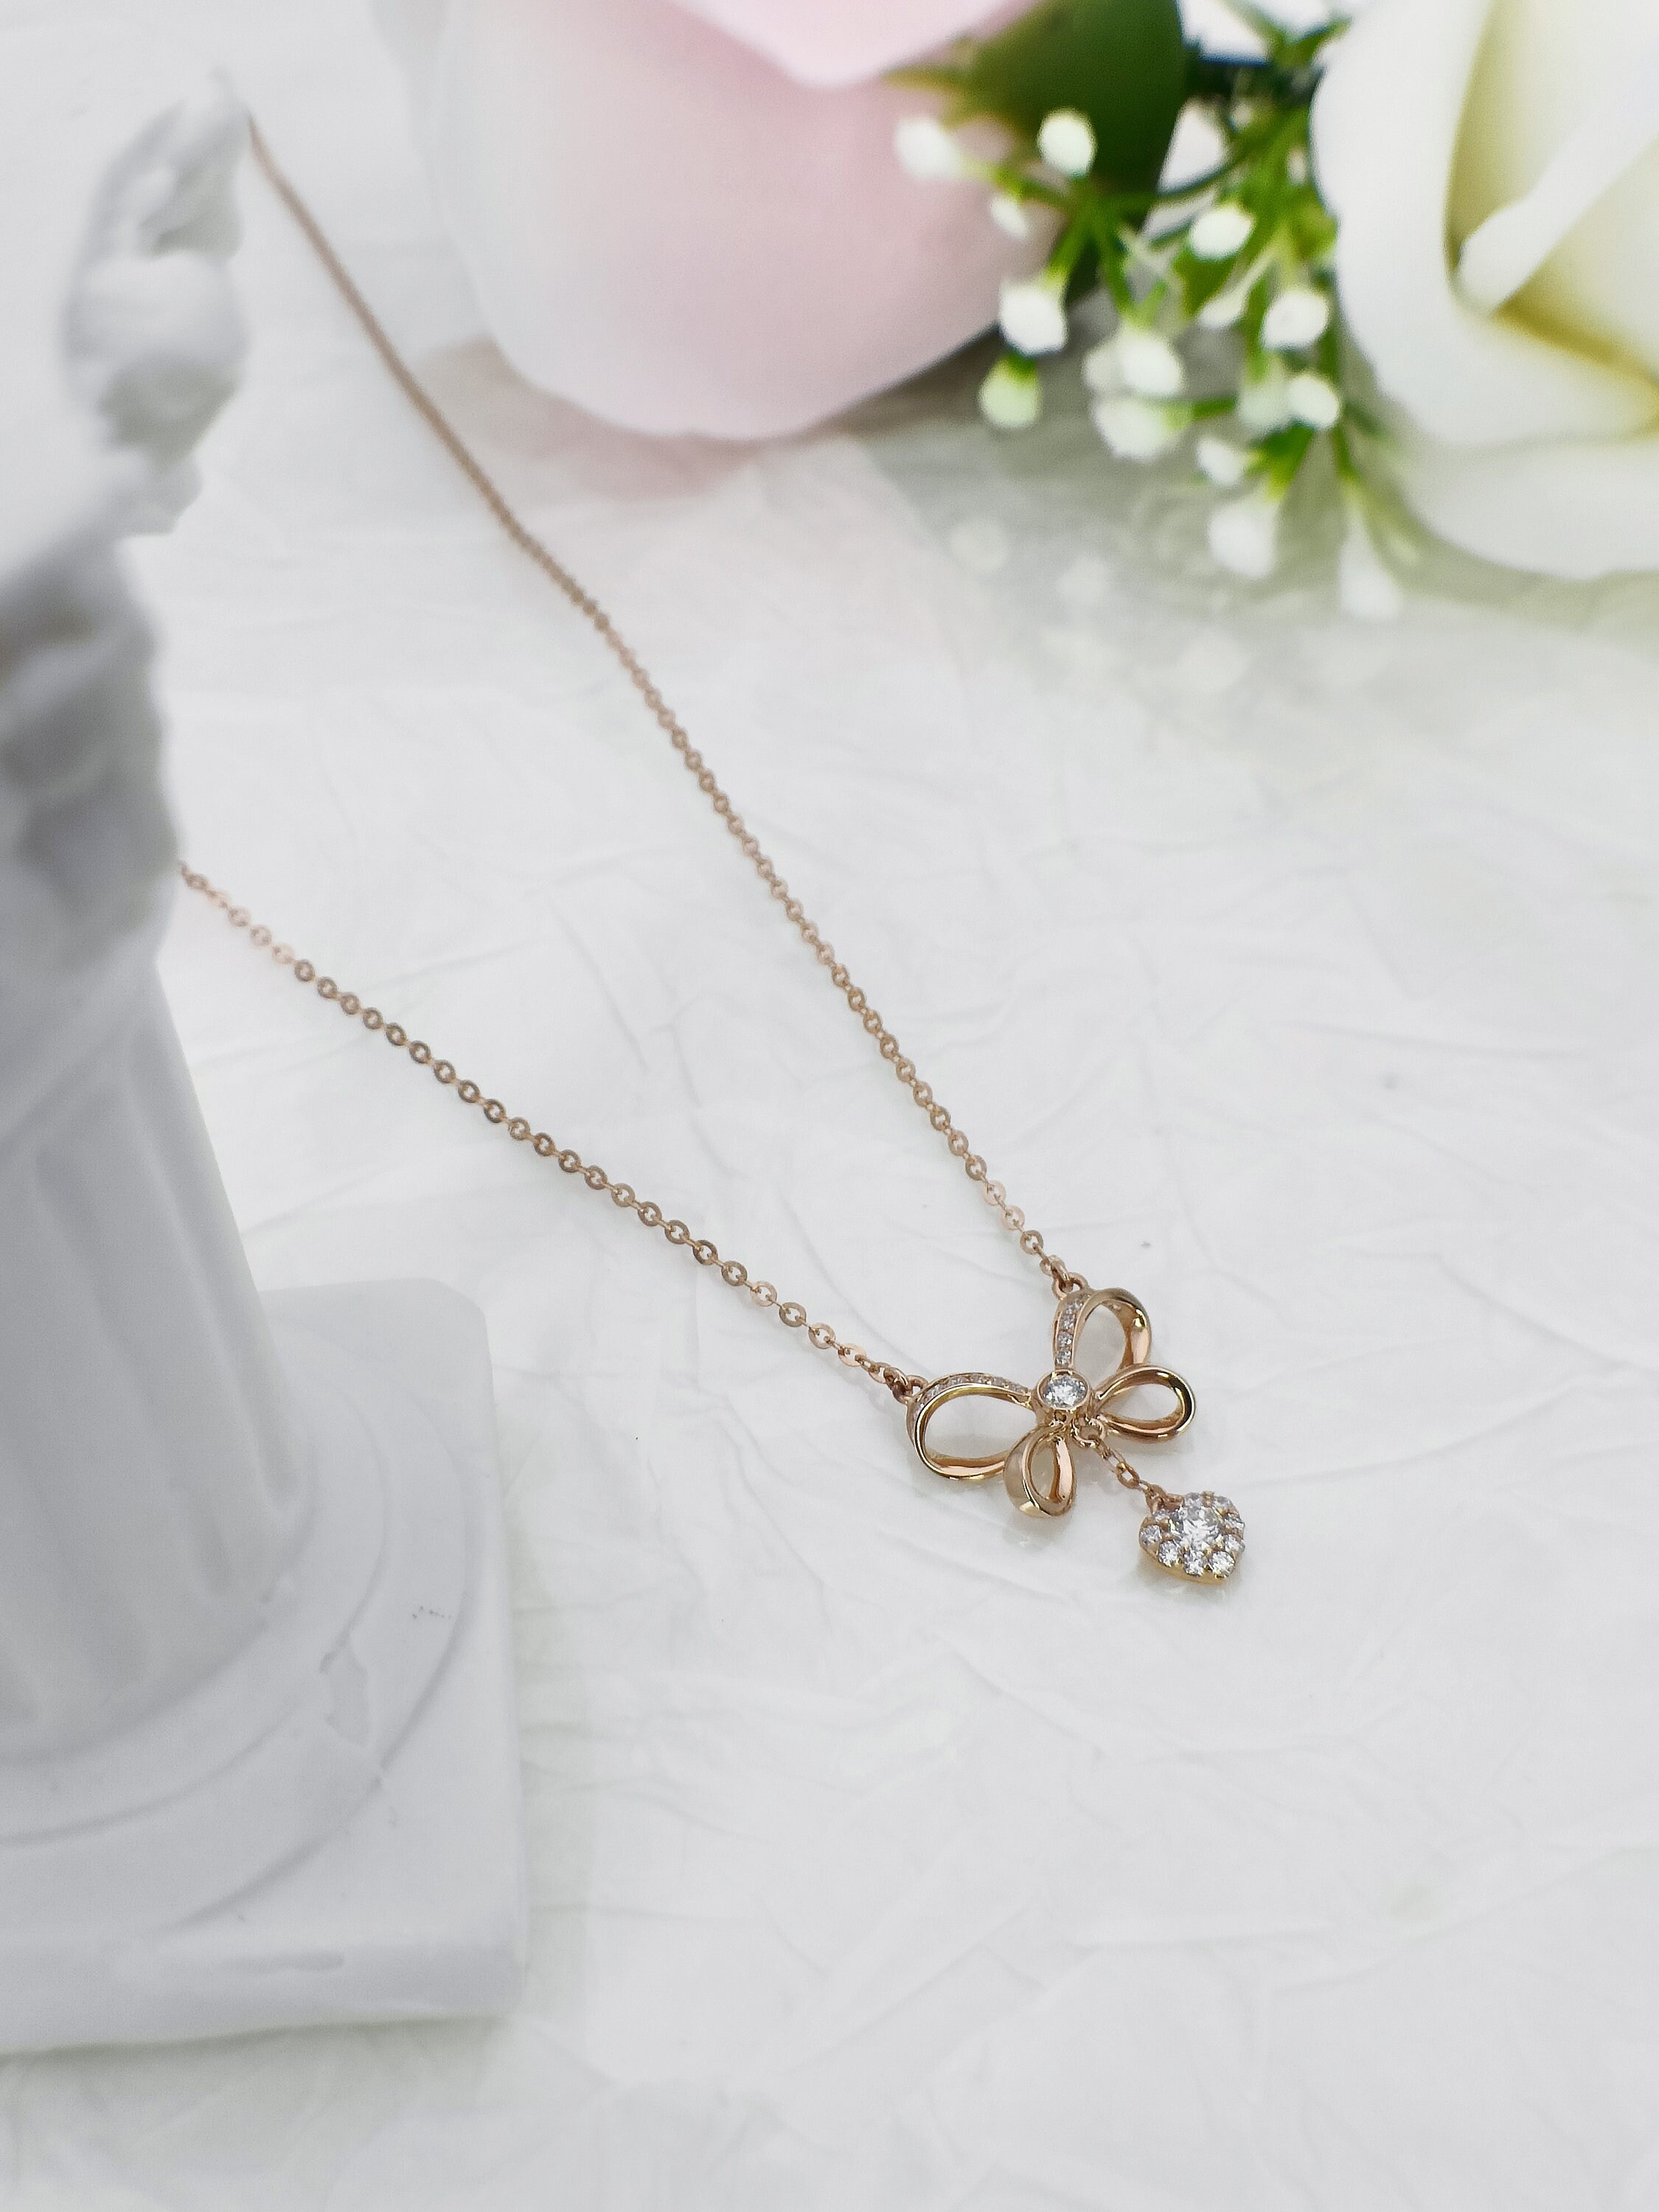 18K Solid Gold Butterfly Necklace With Natural Diamond Pendant - Etsy